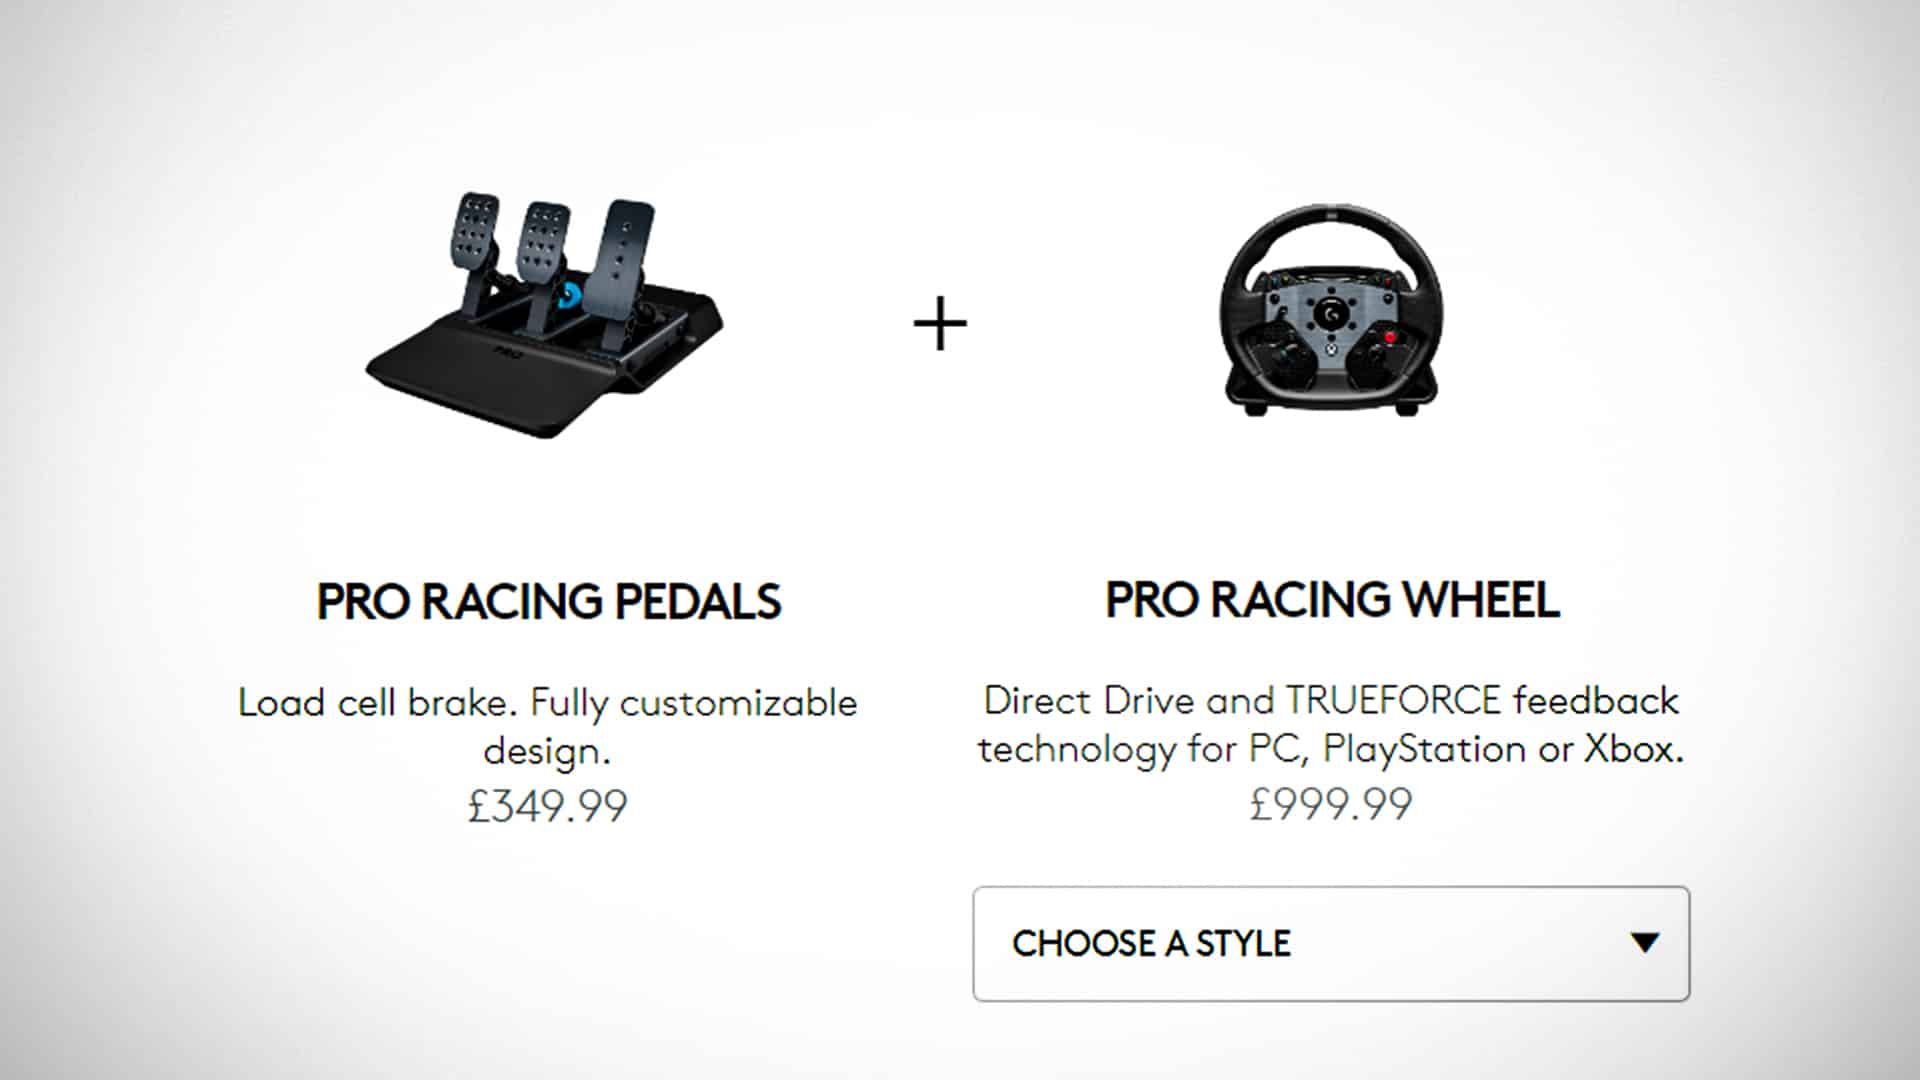 Logitech G PRO Racing Wheel and Pedals price increases by £200 after just two days